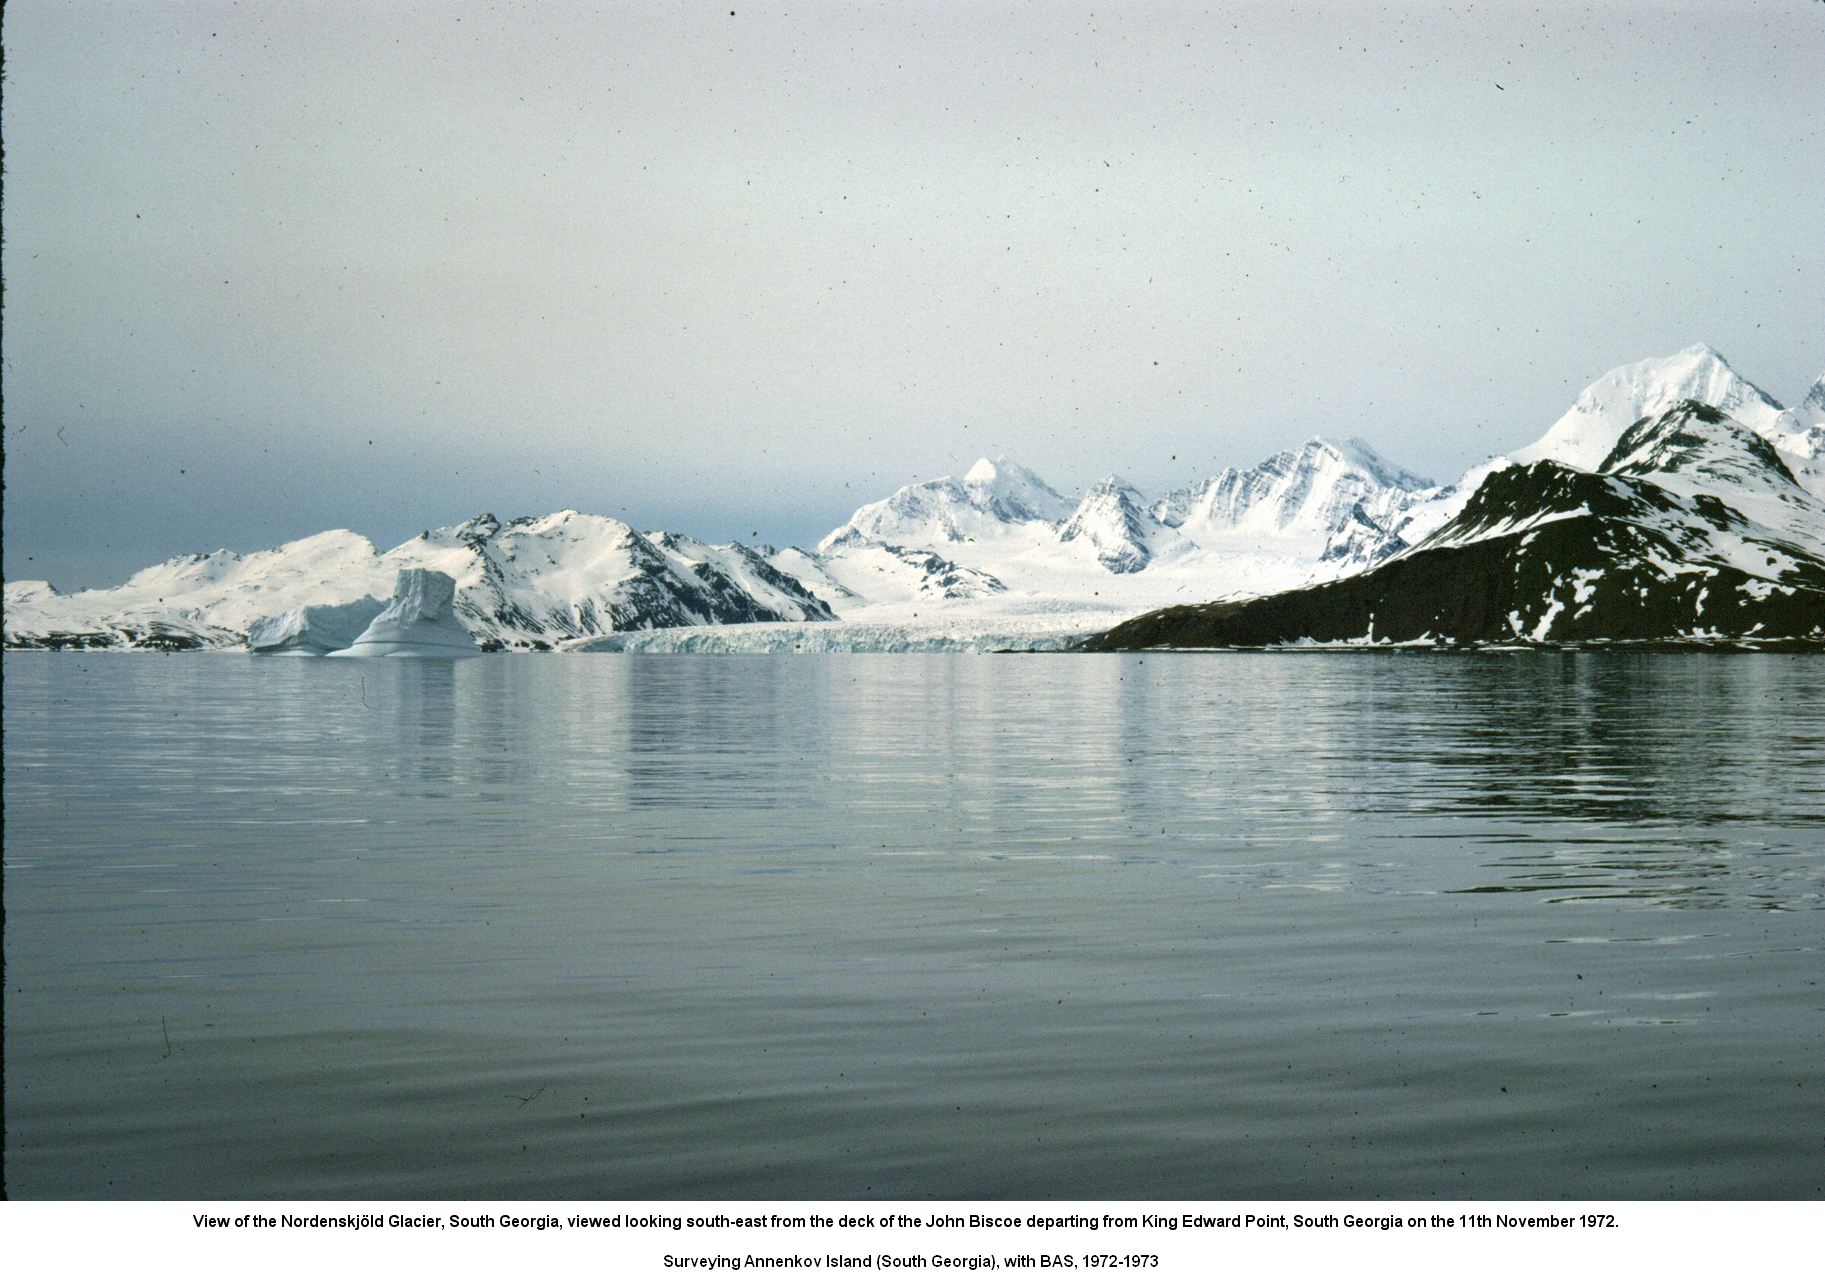 View of the Nordenskjld Glacier, South Georgia, viewed looking south-east from the deck of the John Biscoe departing from King Edward Point, South Georgia on the 11th November 1972.